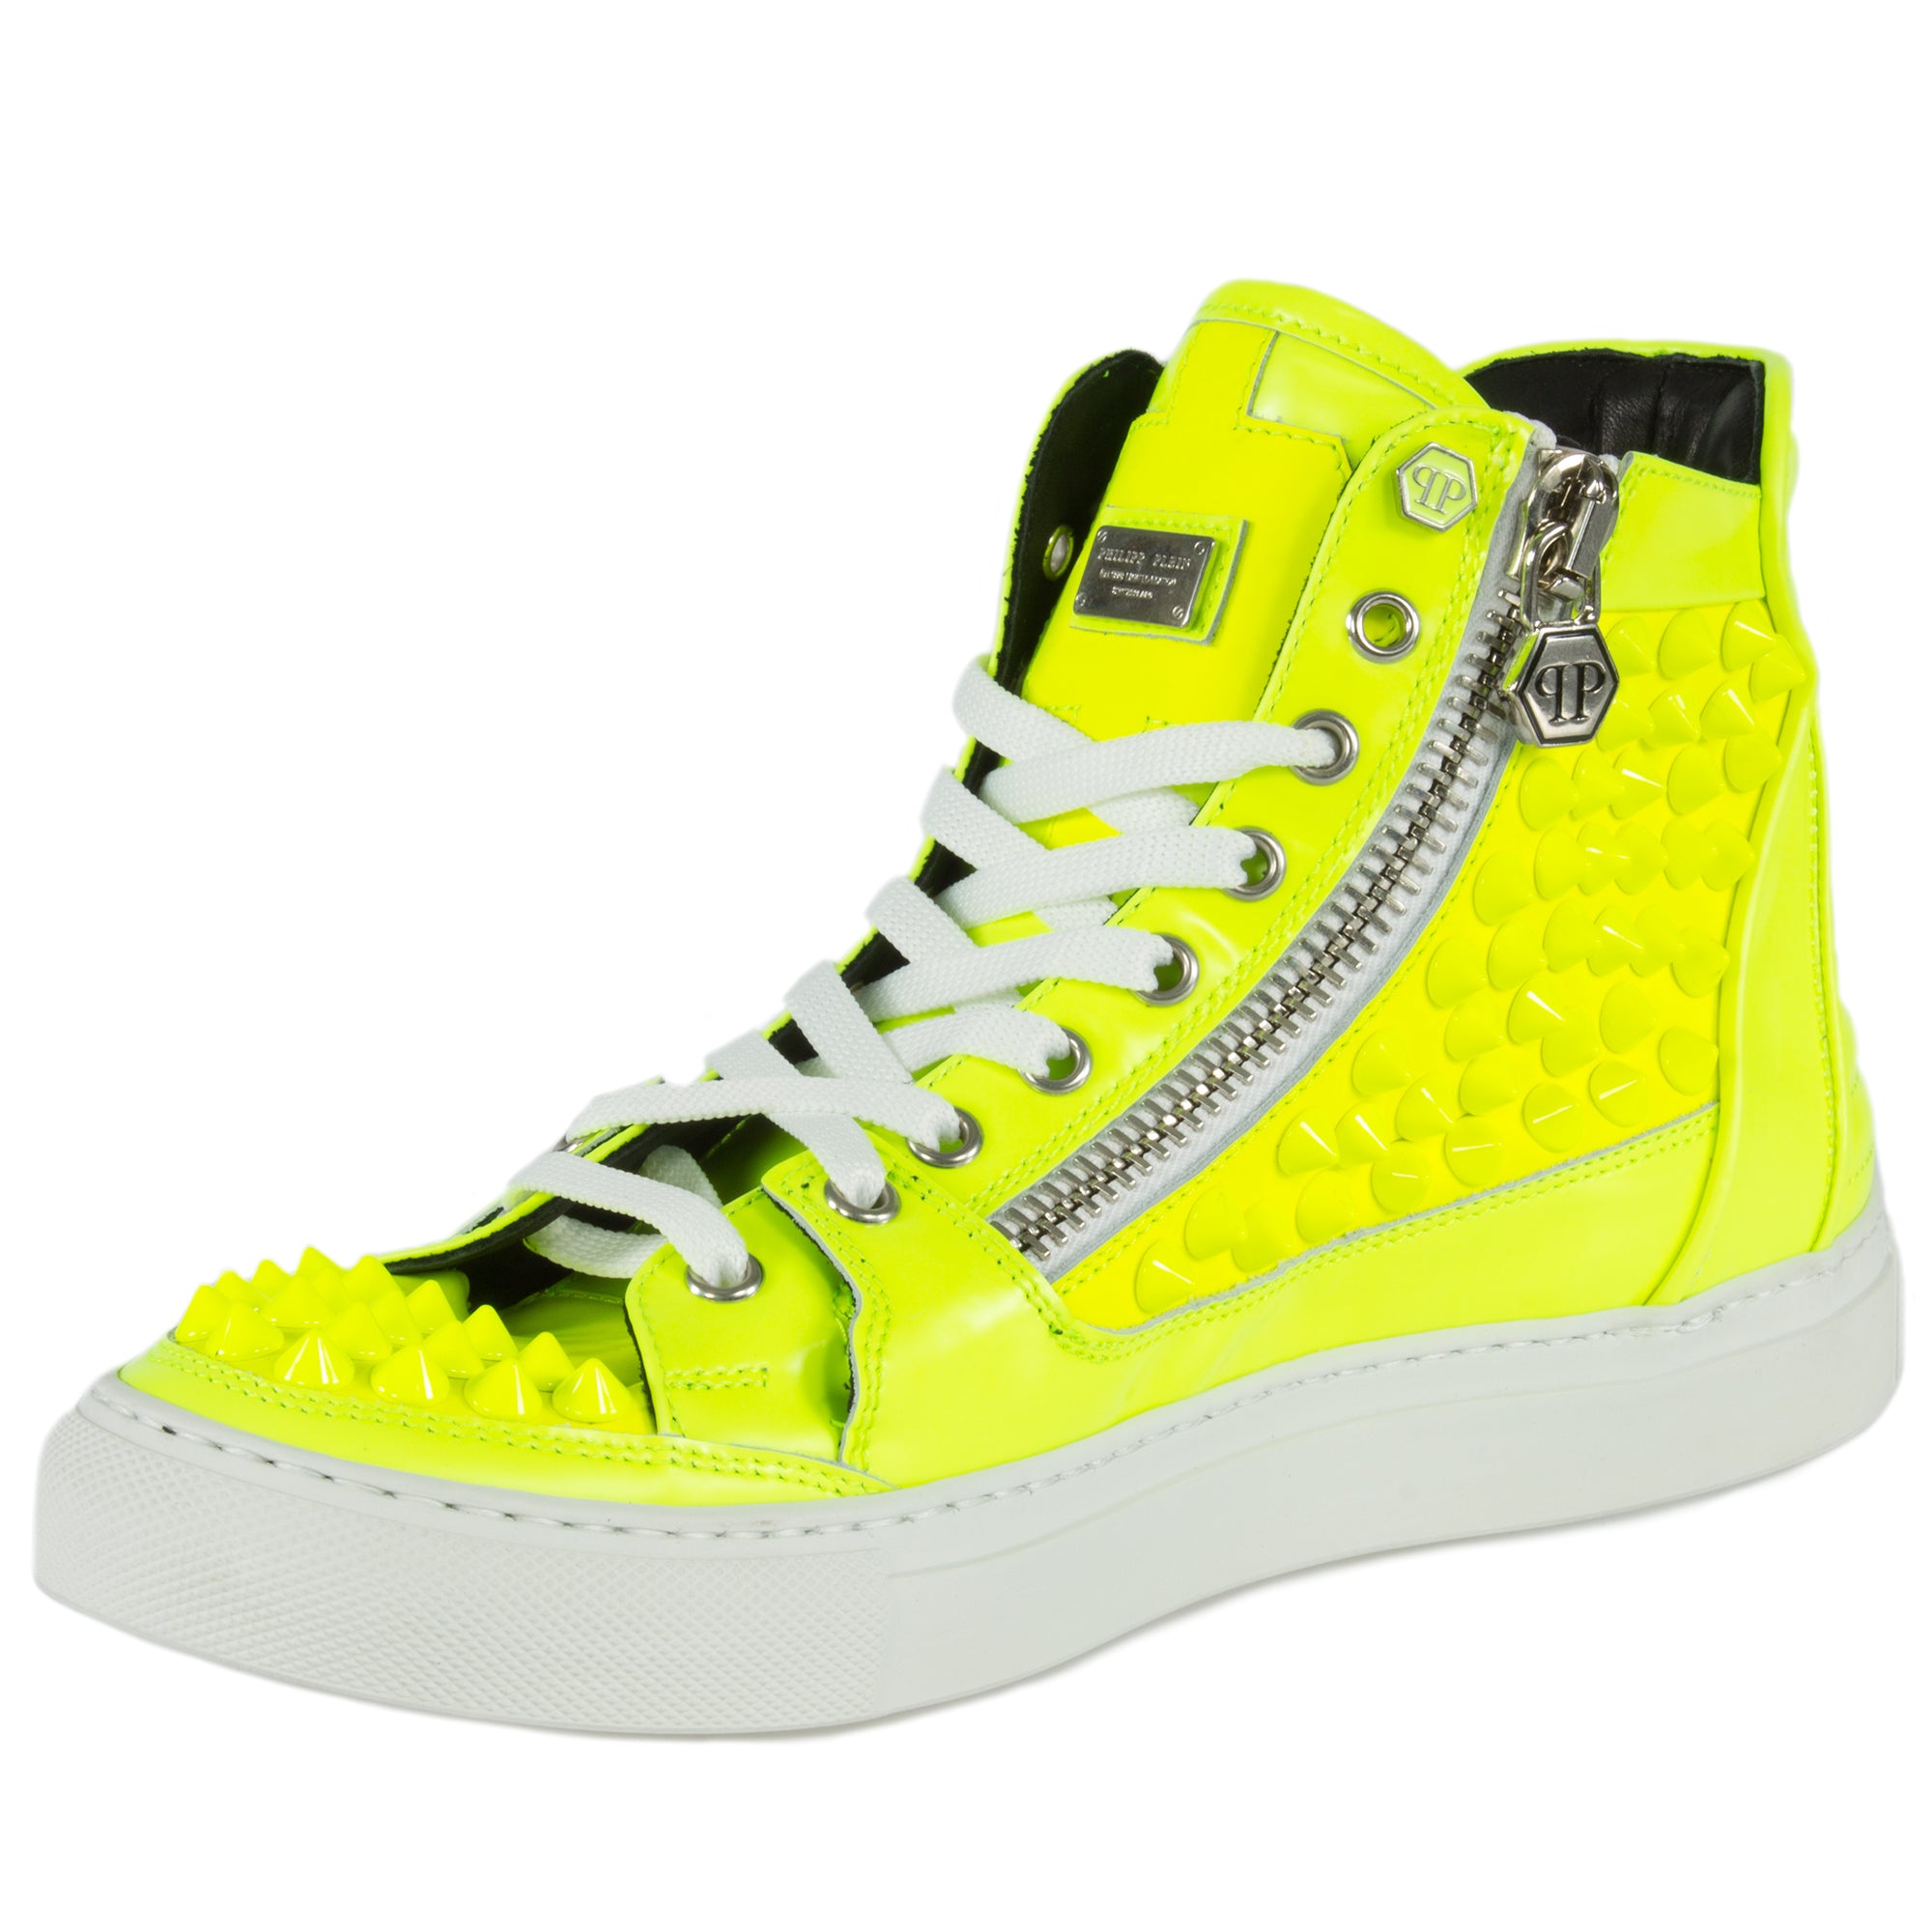 Philipp Plein Clever Hi-Top Sneakers | Yellow Leather